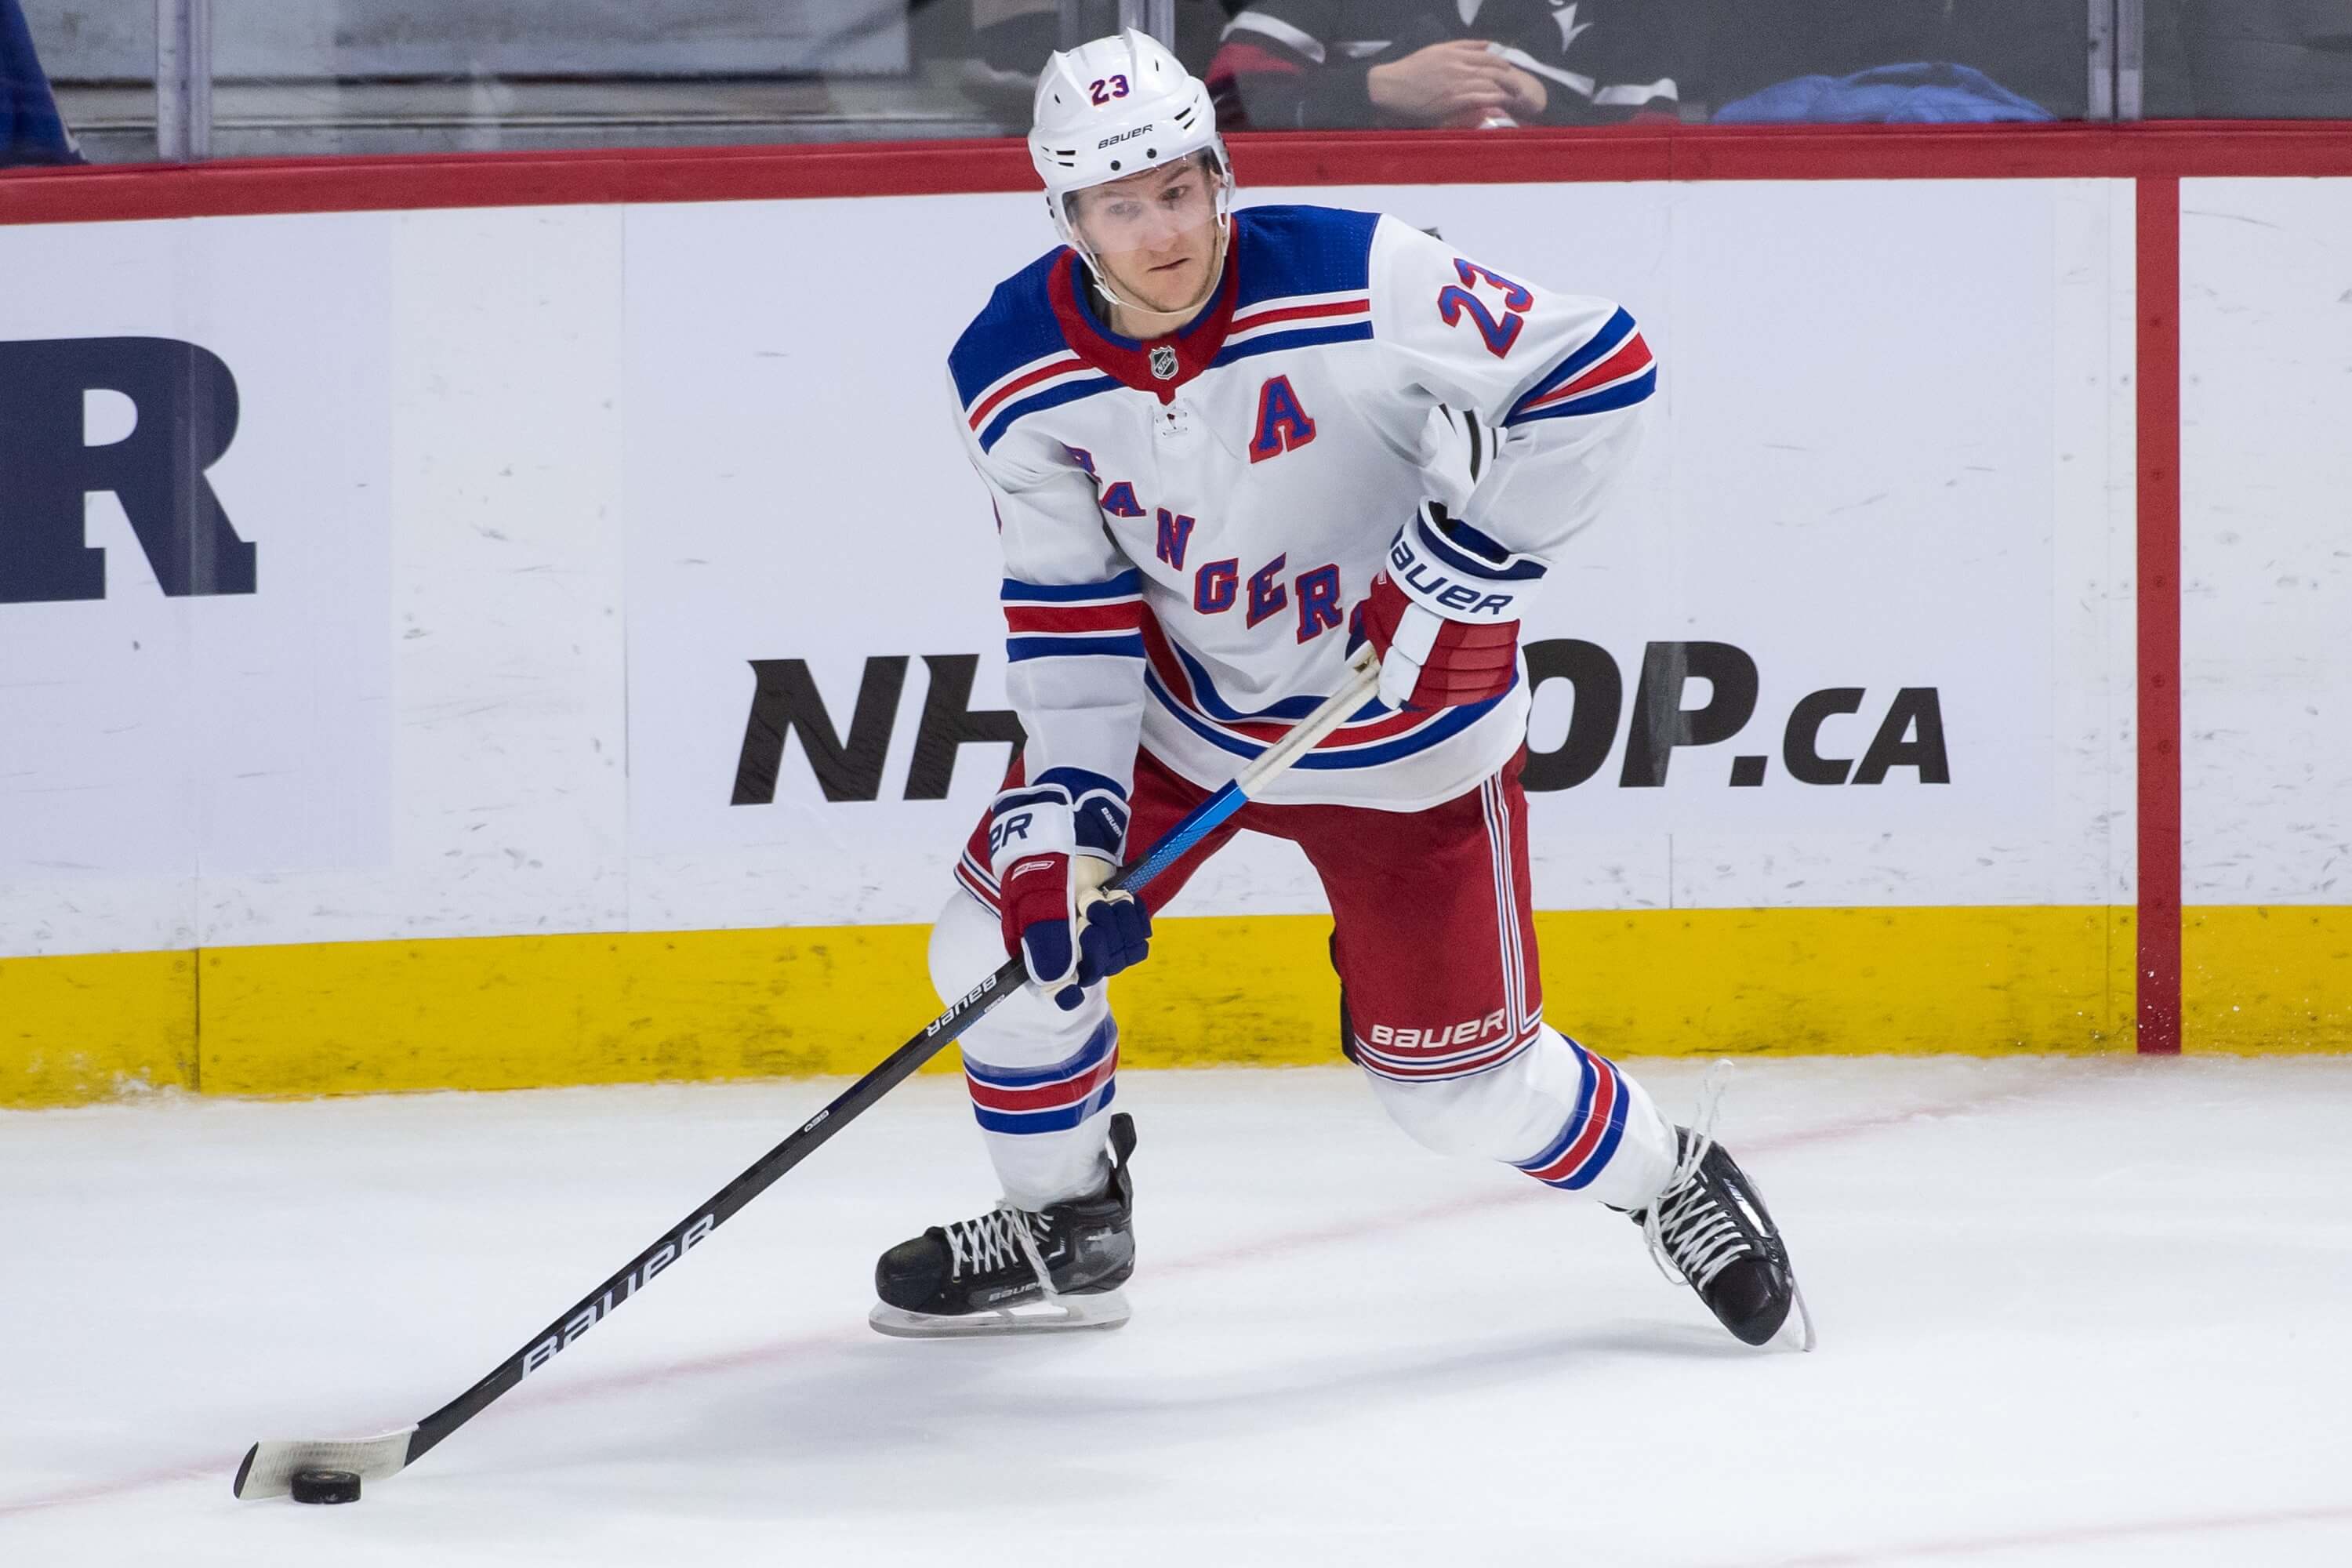 How To Bet - Stars vs Rangers Odds, Picks, and Predictions Tonight: Fox Helps Rangers Stay Hot